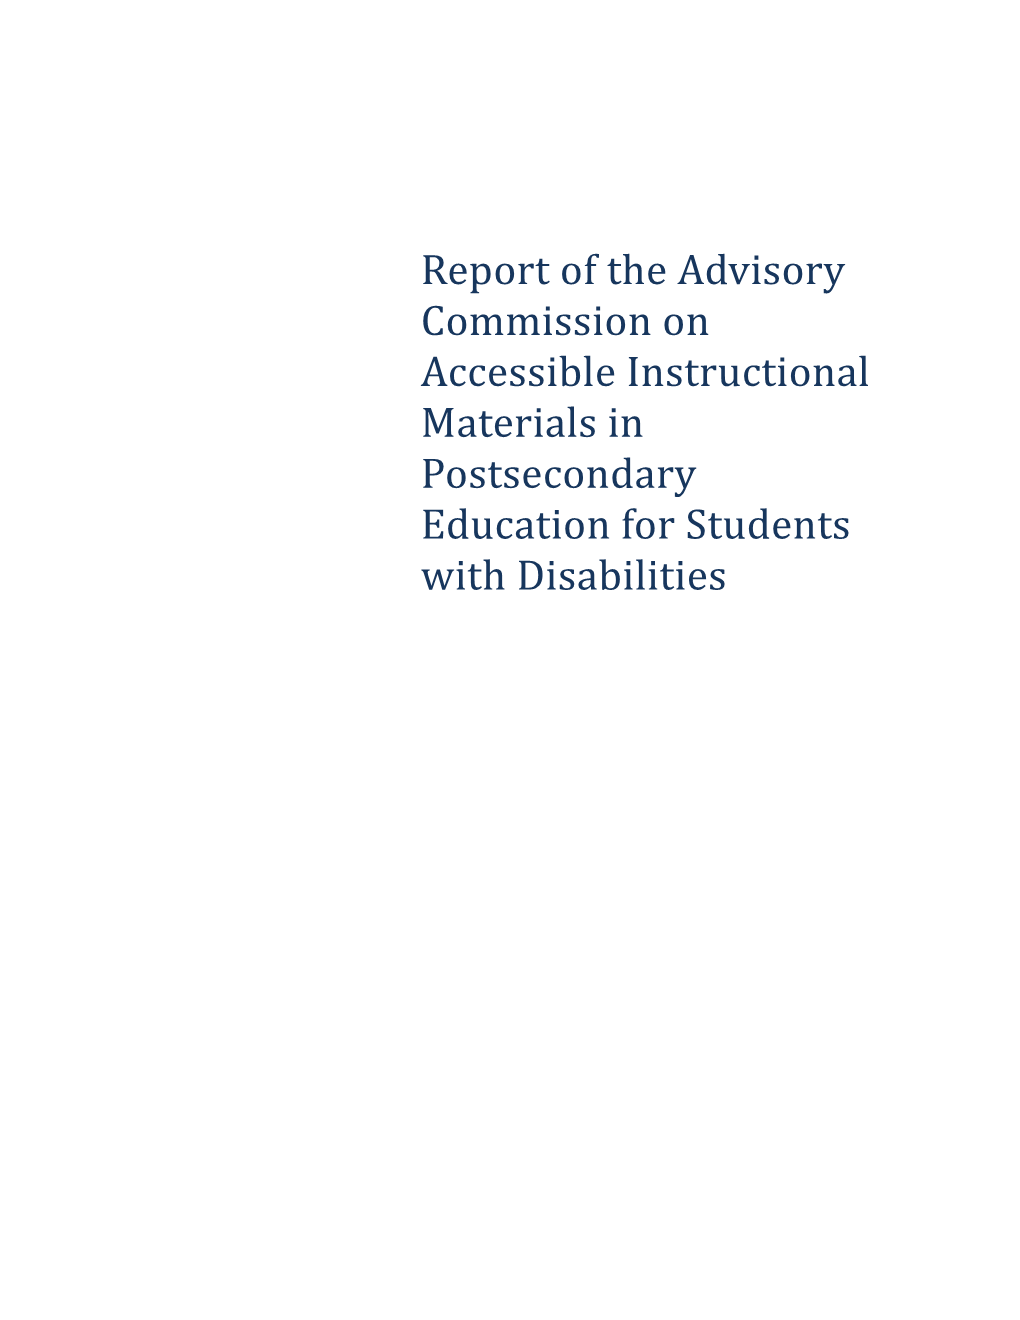 DRAFT Report of the Advisory Commission on Accessible Instructional Materials in Postsecondary